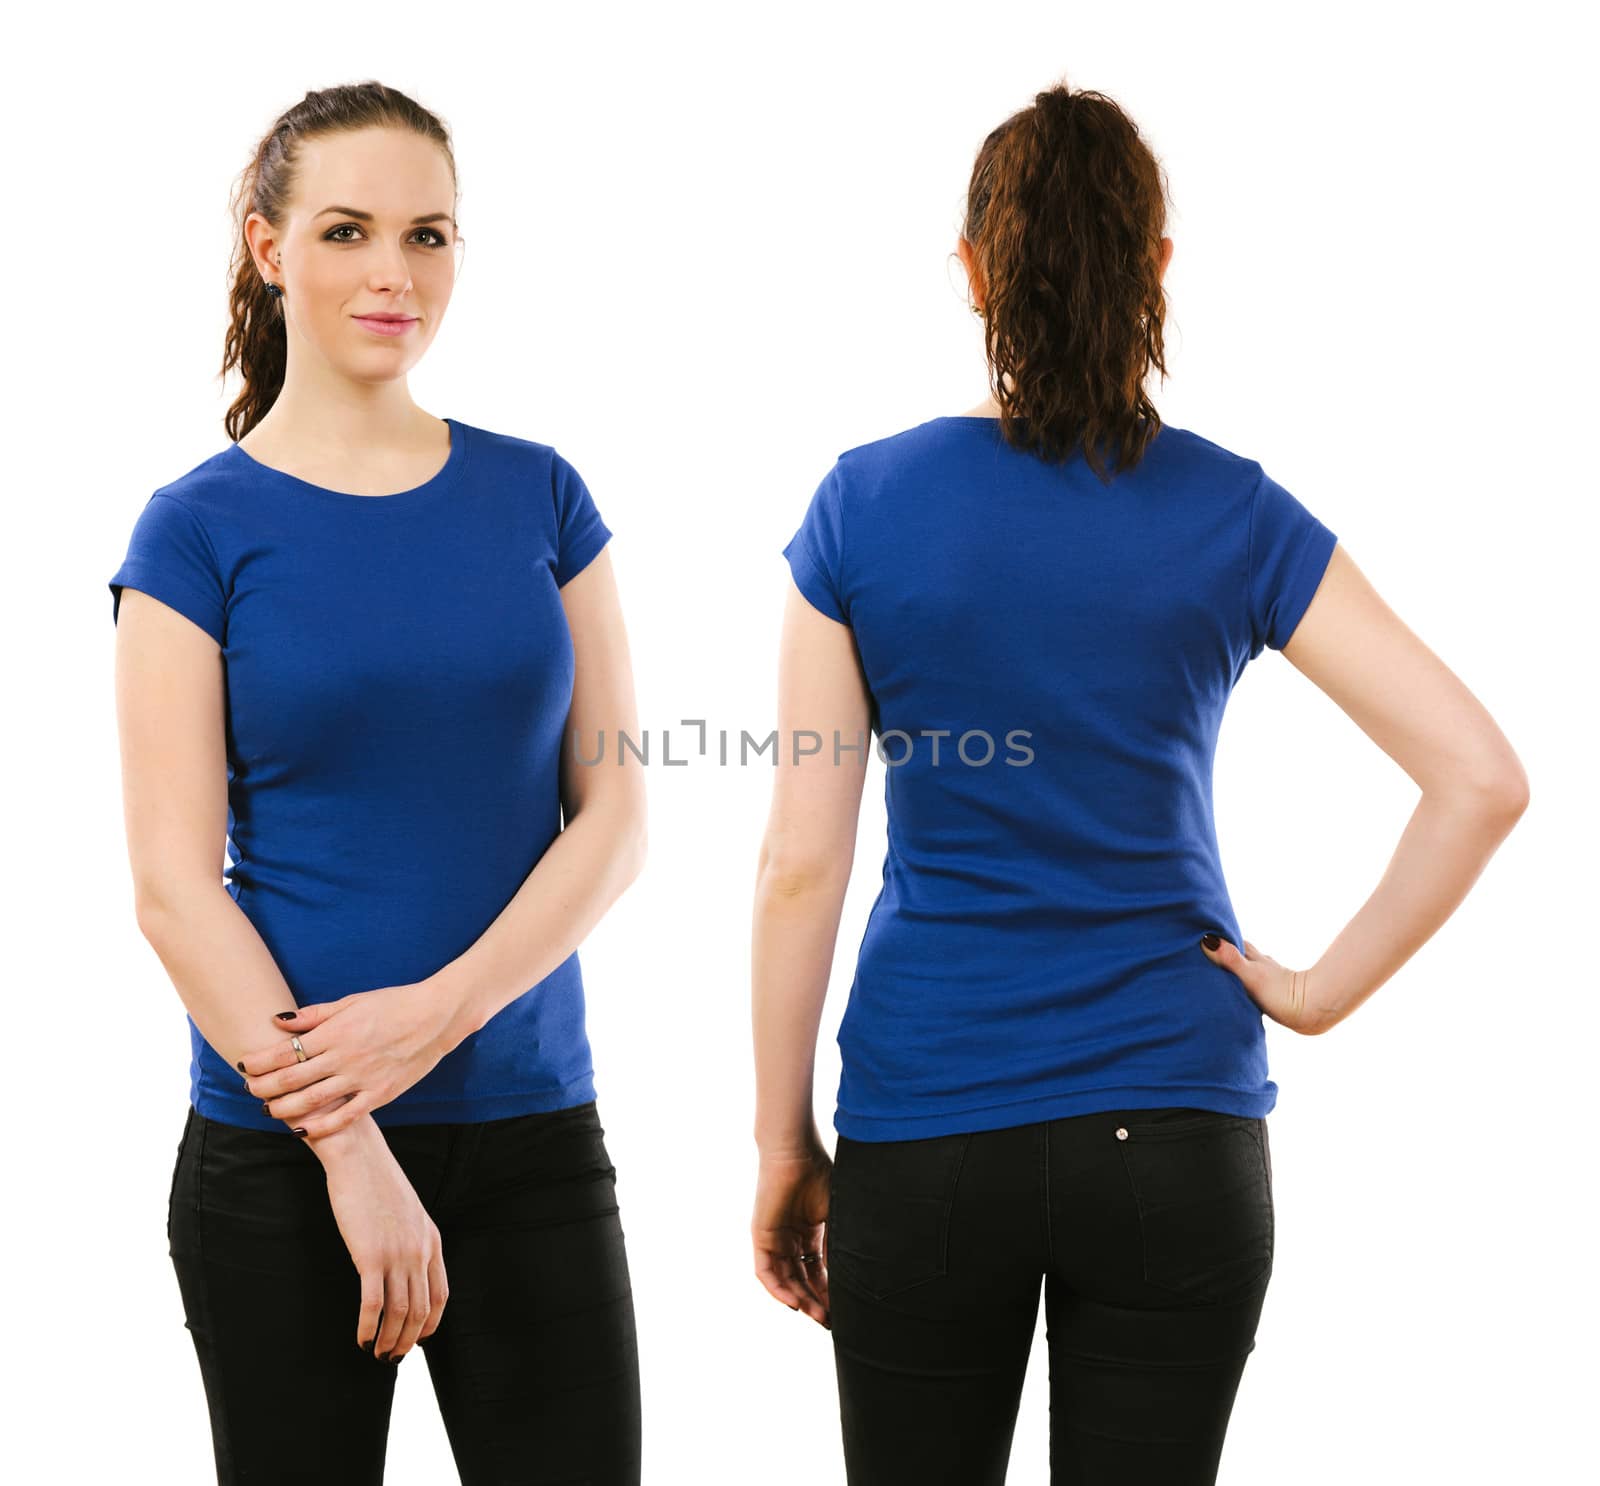 Smiling woman wearing blank blue shirt by sumners